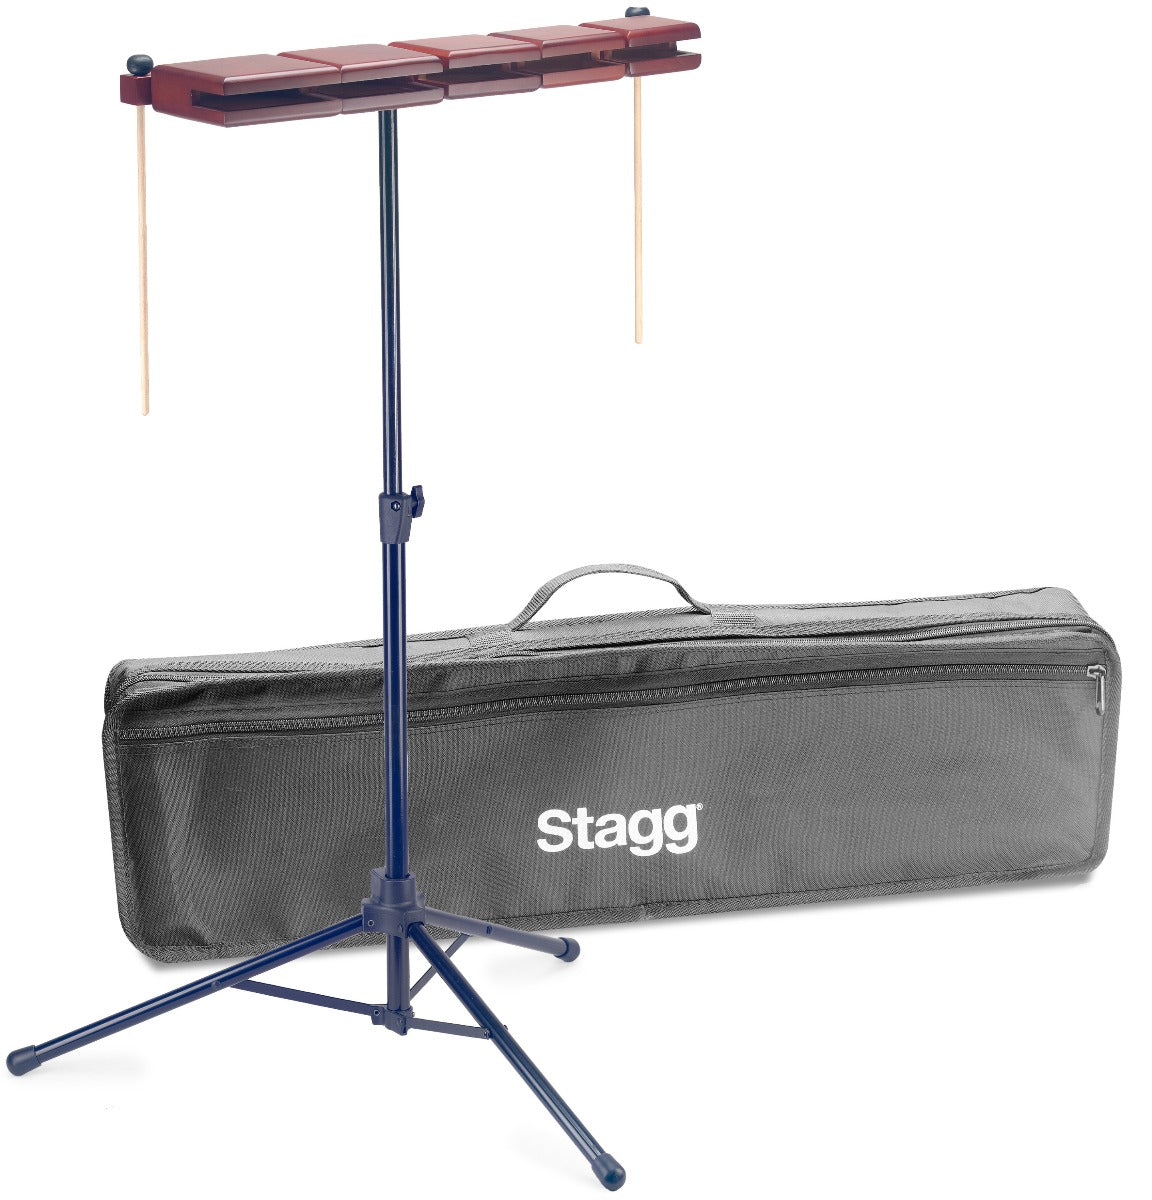 Stagg Temple Block Set (5 Piece) With Stand Bag And Mallets